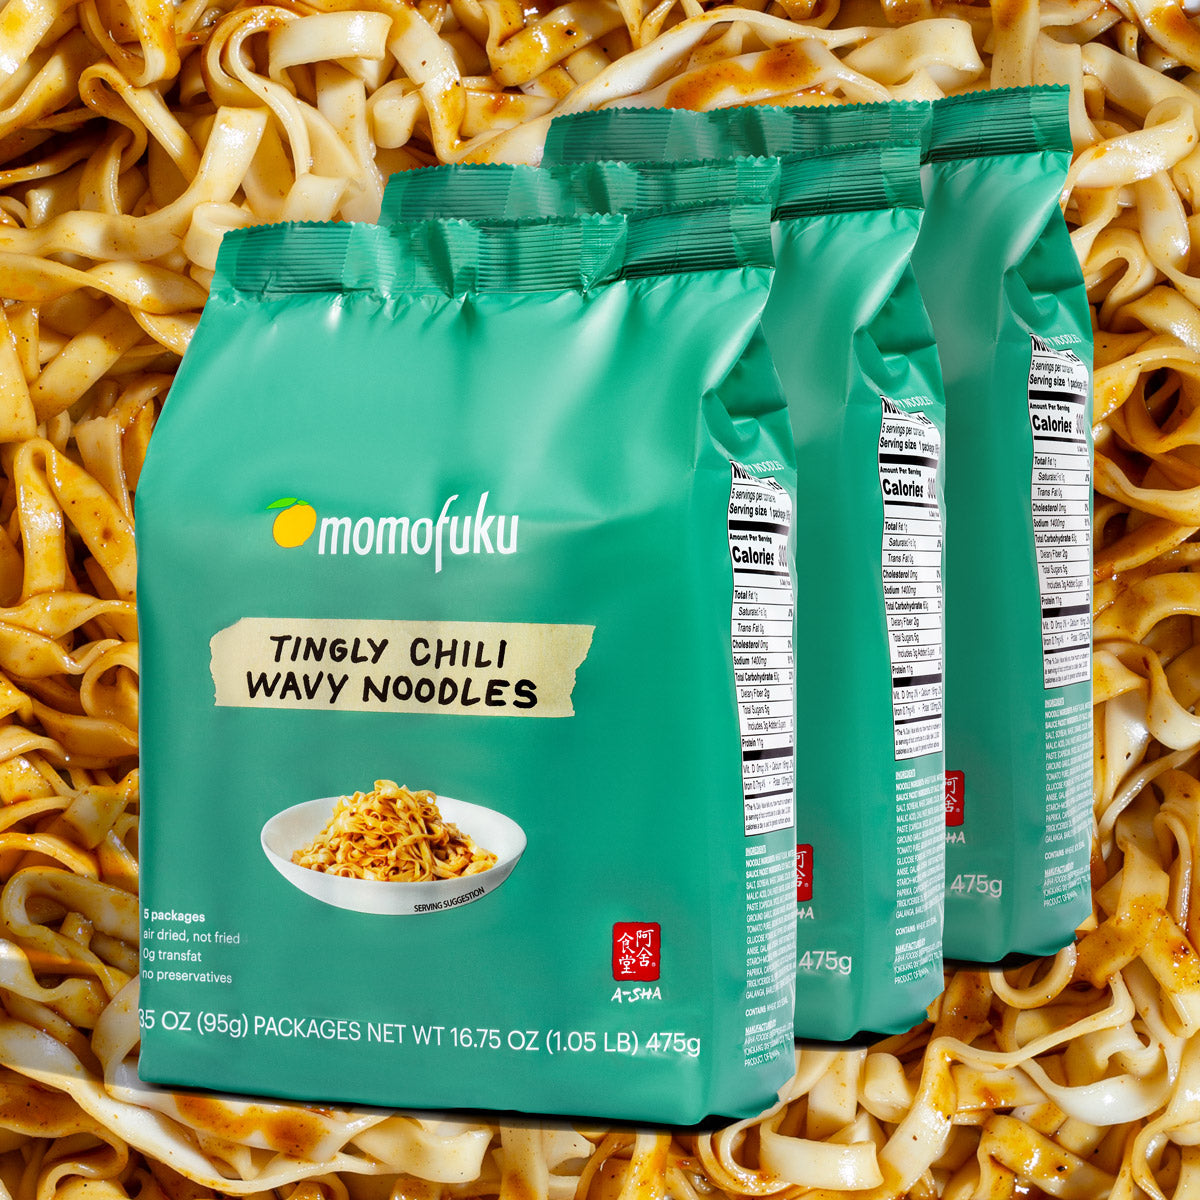 3 packs of tingly chili noodles